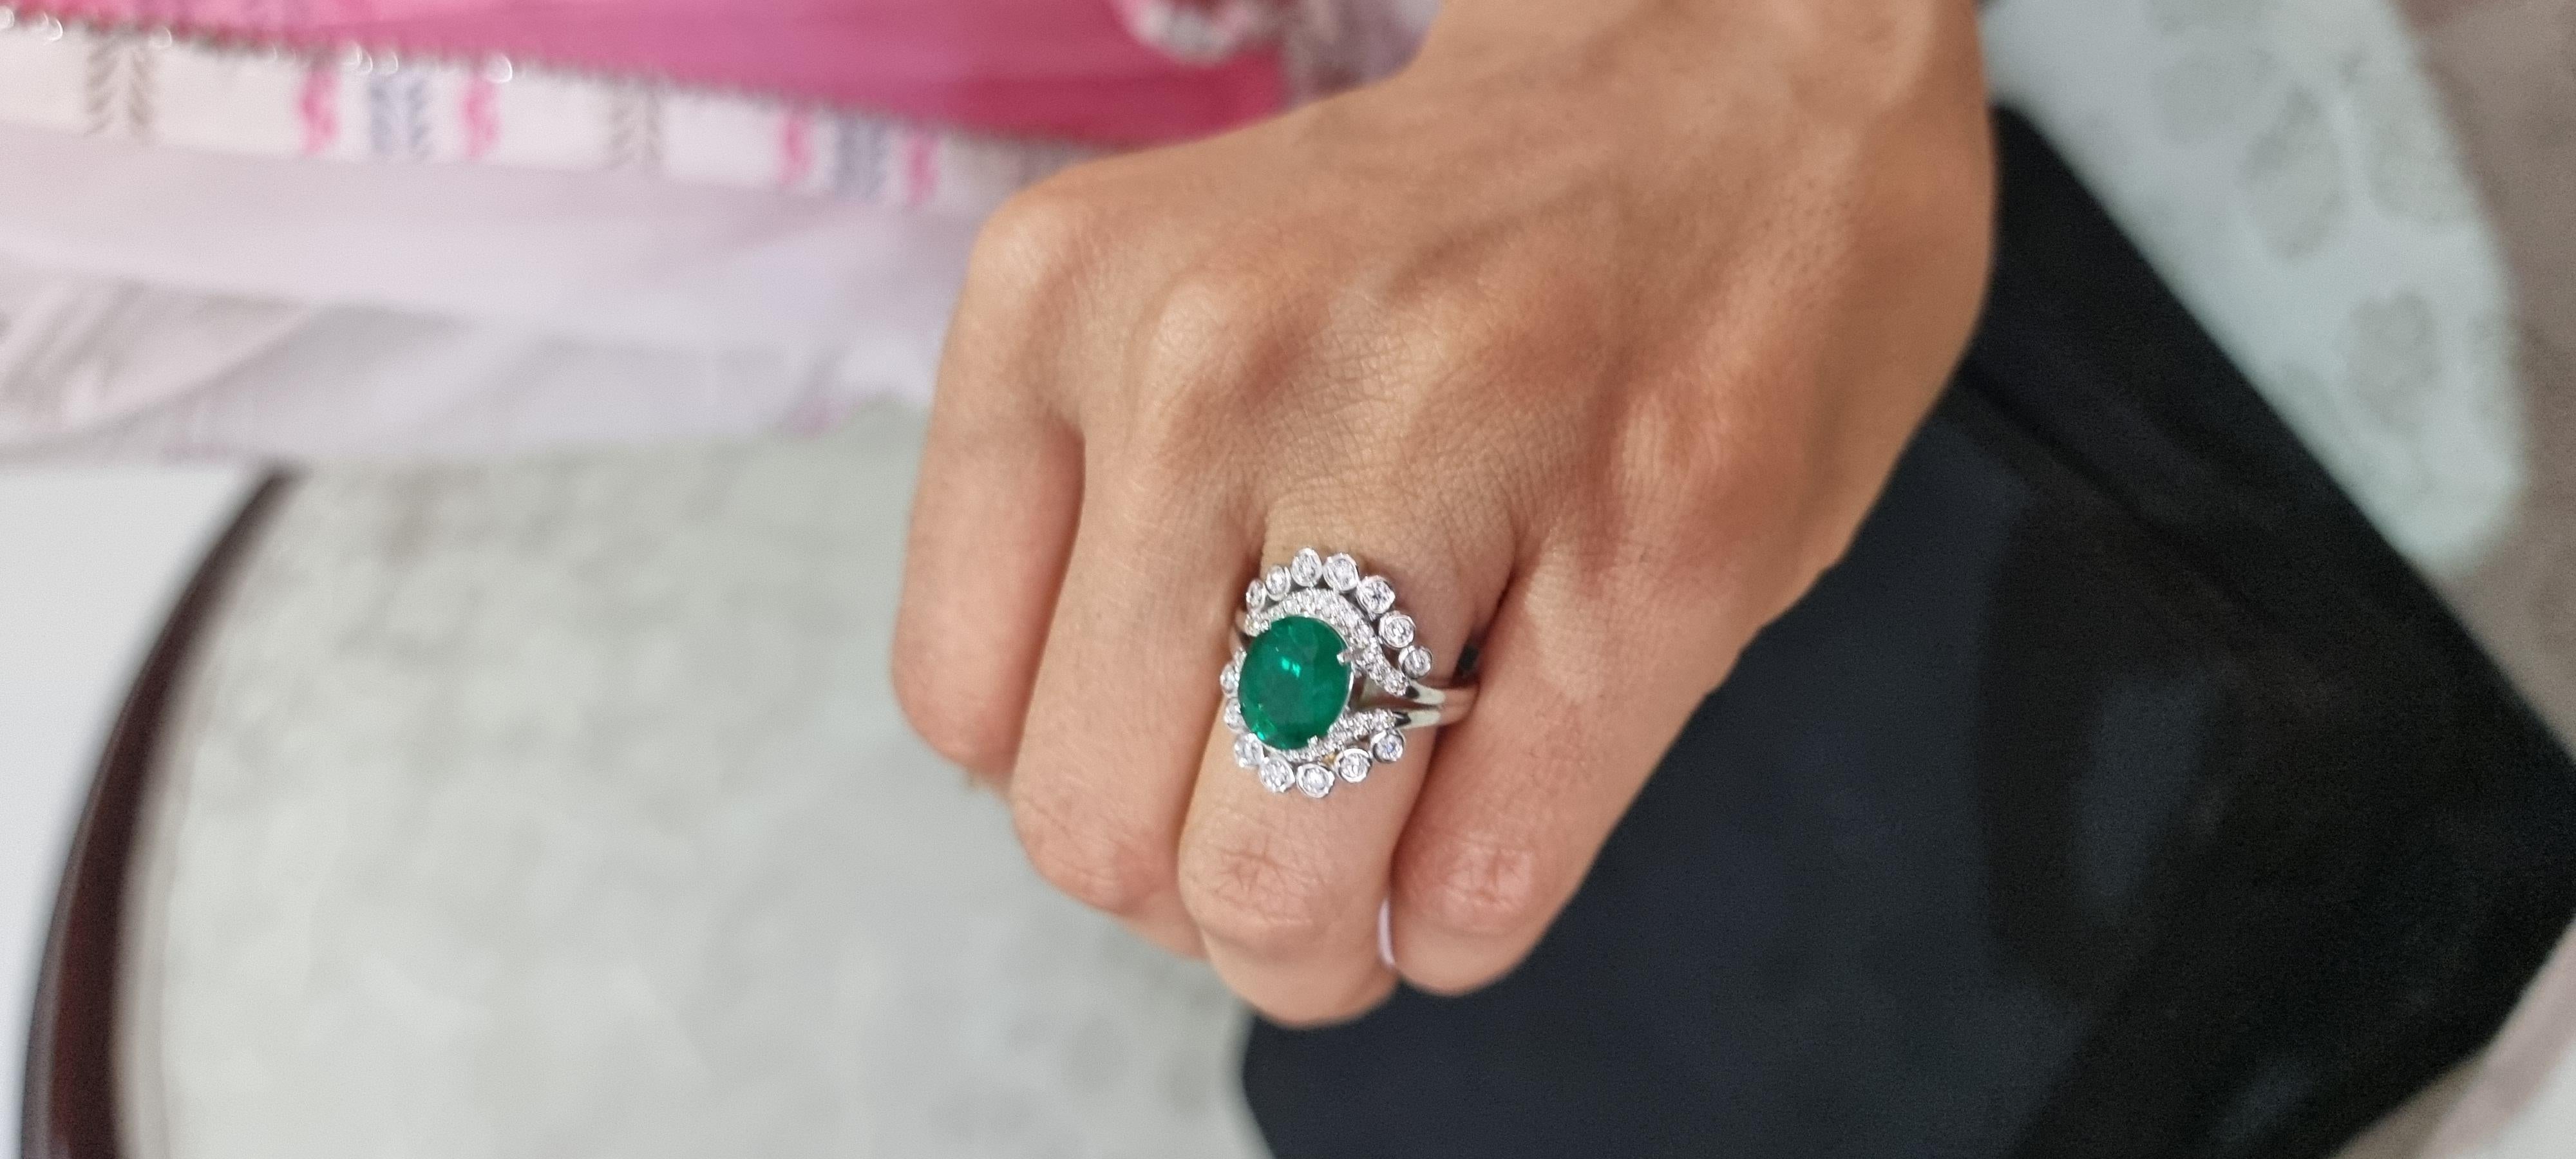 Natural Zambian Emerald Ring with Diamonds and 14k Gold For Sale 1